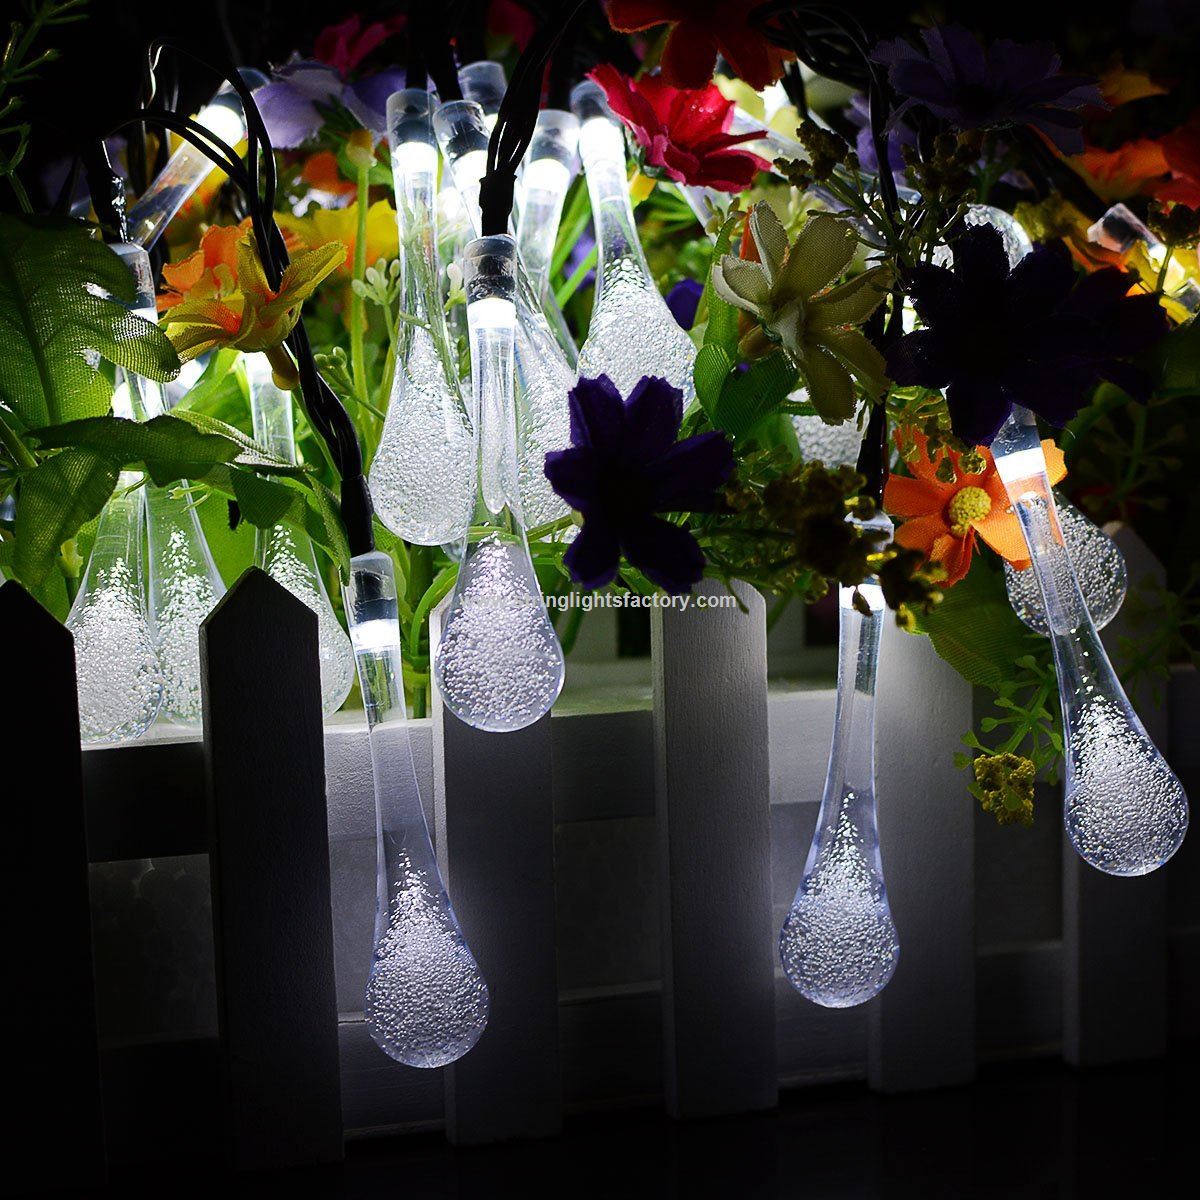 Christmas Decorative Solar Powered Lights 30 LED 19.7ft 8 Modes Water Drop Fairy String light